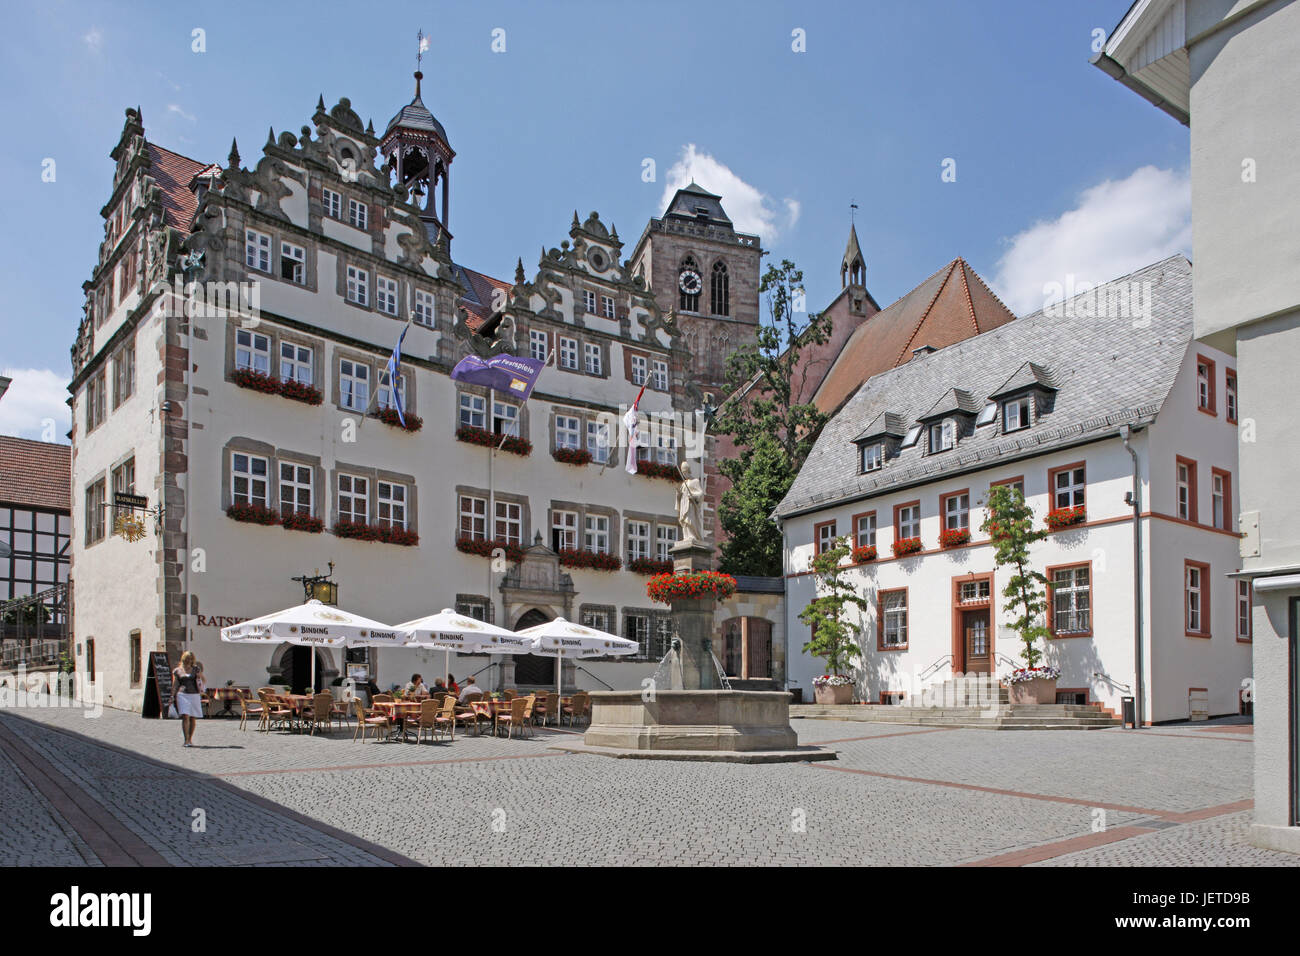 Germany, Hessen, Bad Hersfeld, city hall, well, Old Town, square, building, cafe, gastronomy, outside, statue, steeple, person, tourist, sunshine, Stock Photo